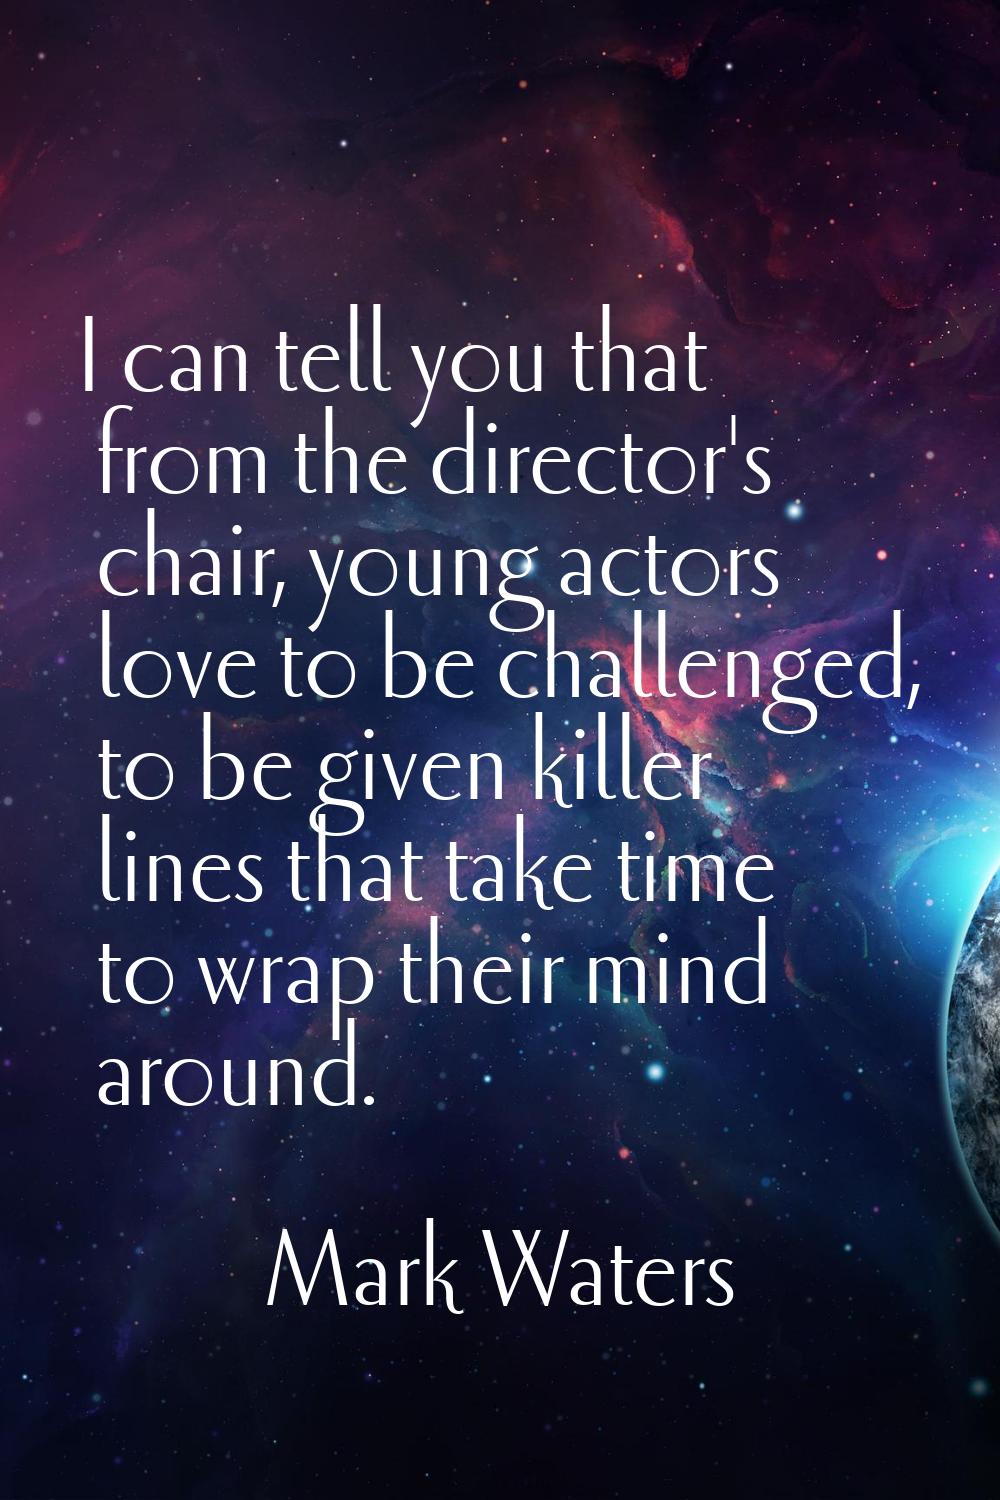 I can tell you that from the director's chair, young actors love to be challenged, to be given kill